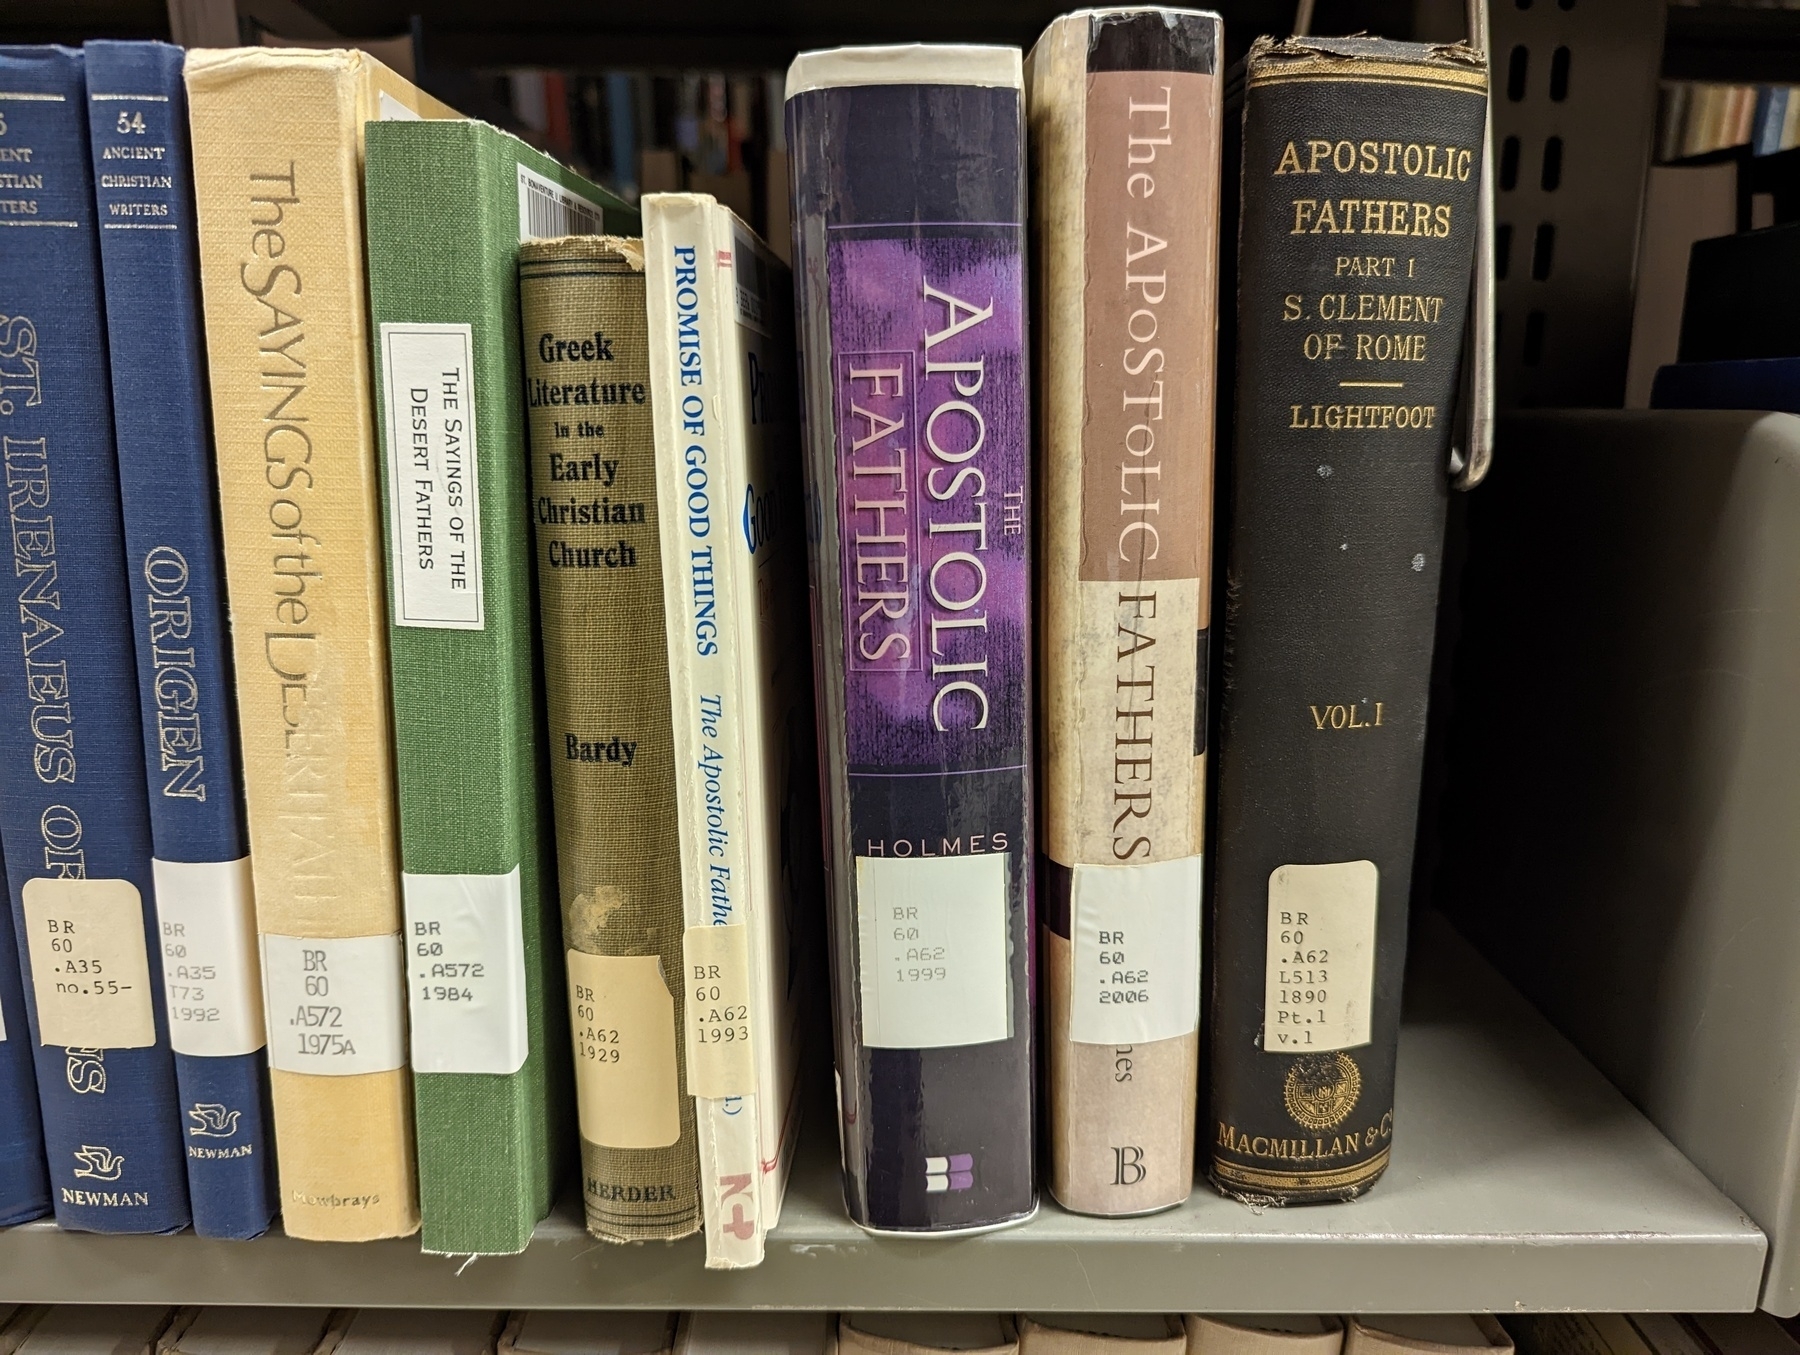 Spines of The Apostolic Fathers and other library books